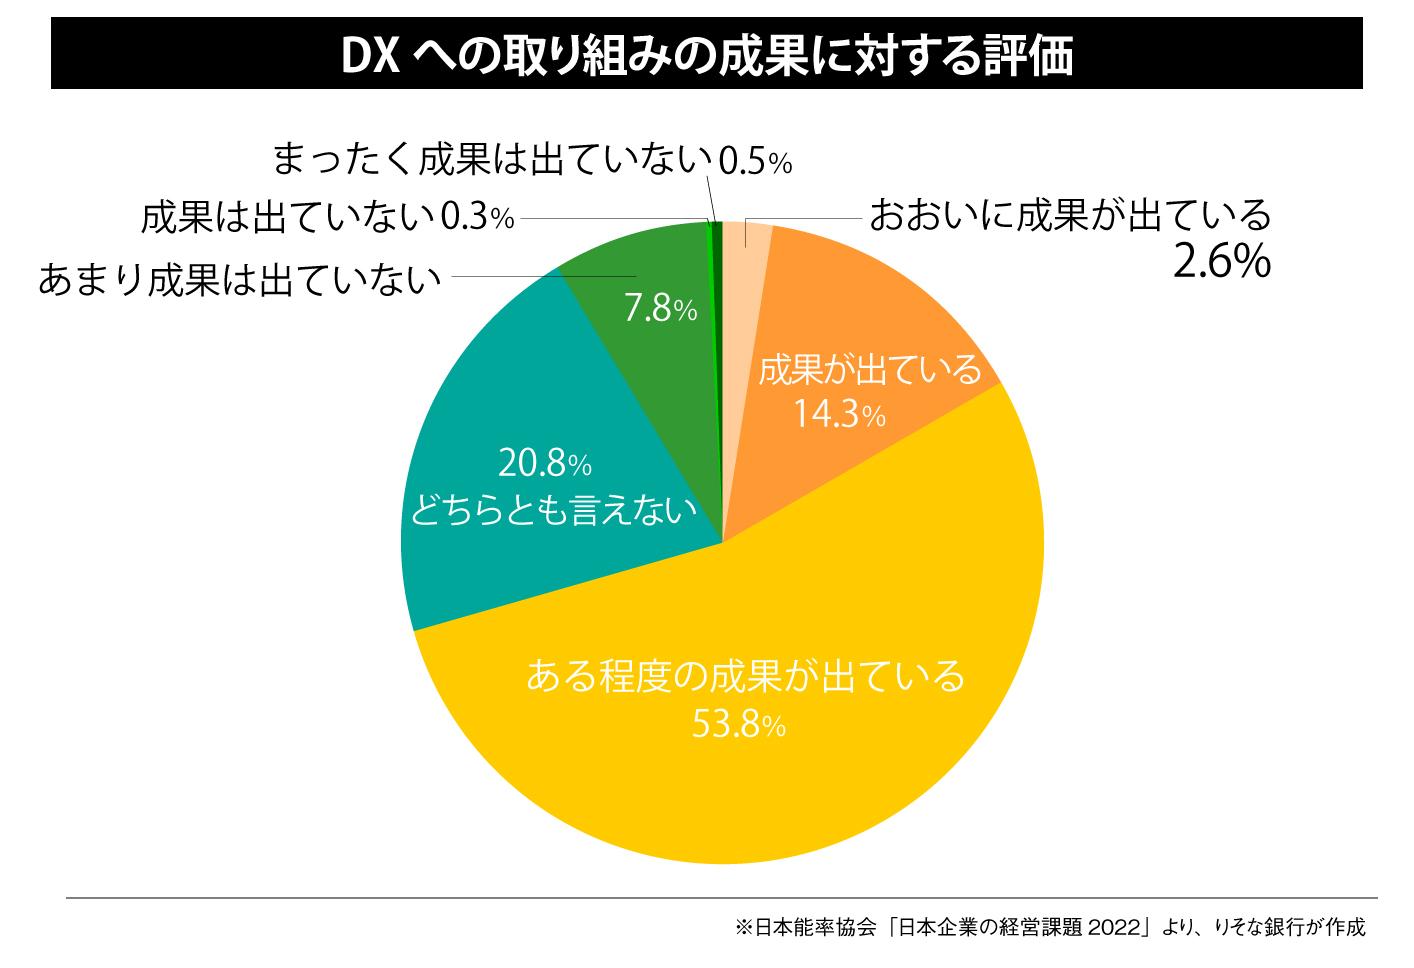 DXへの取り組みの成果に対する評価